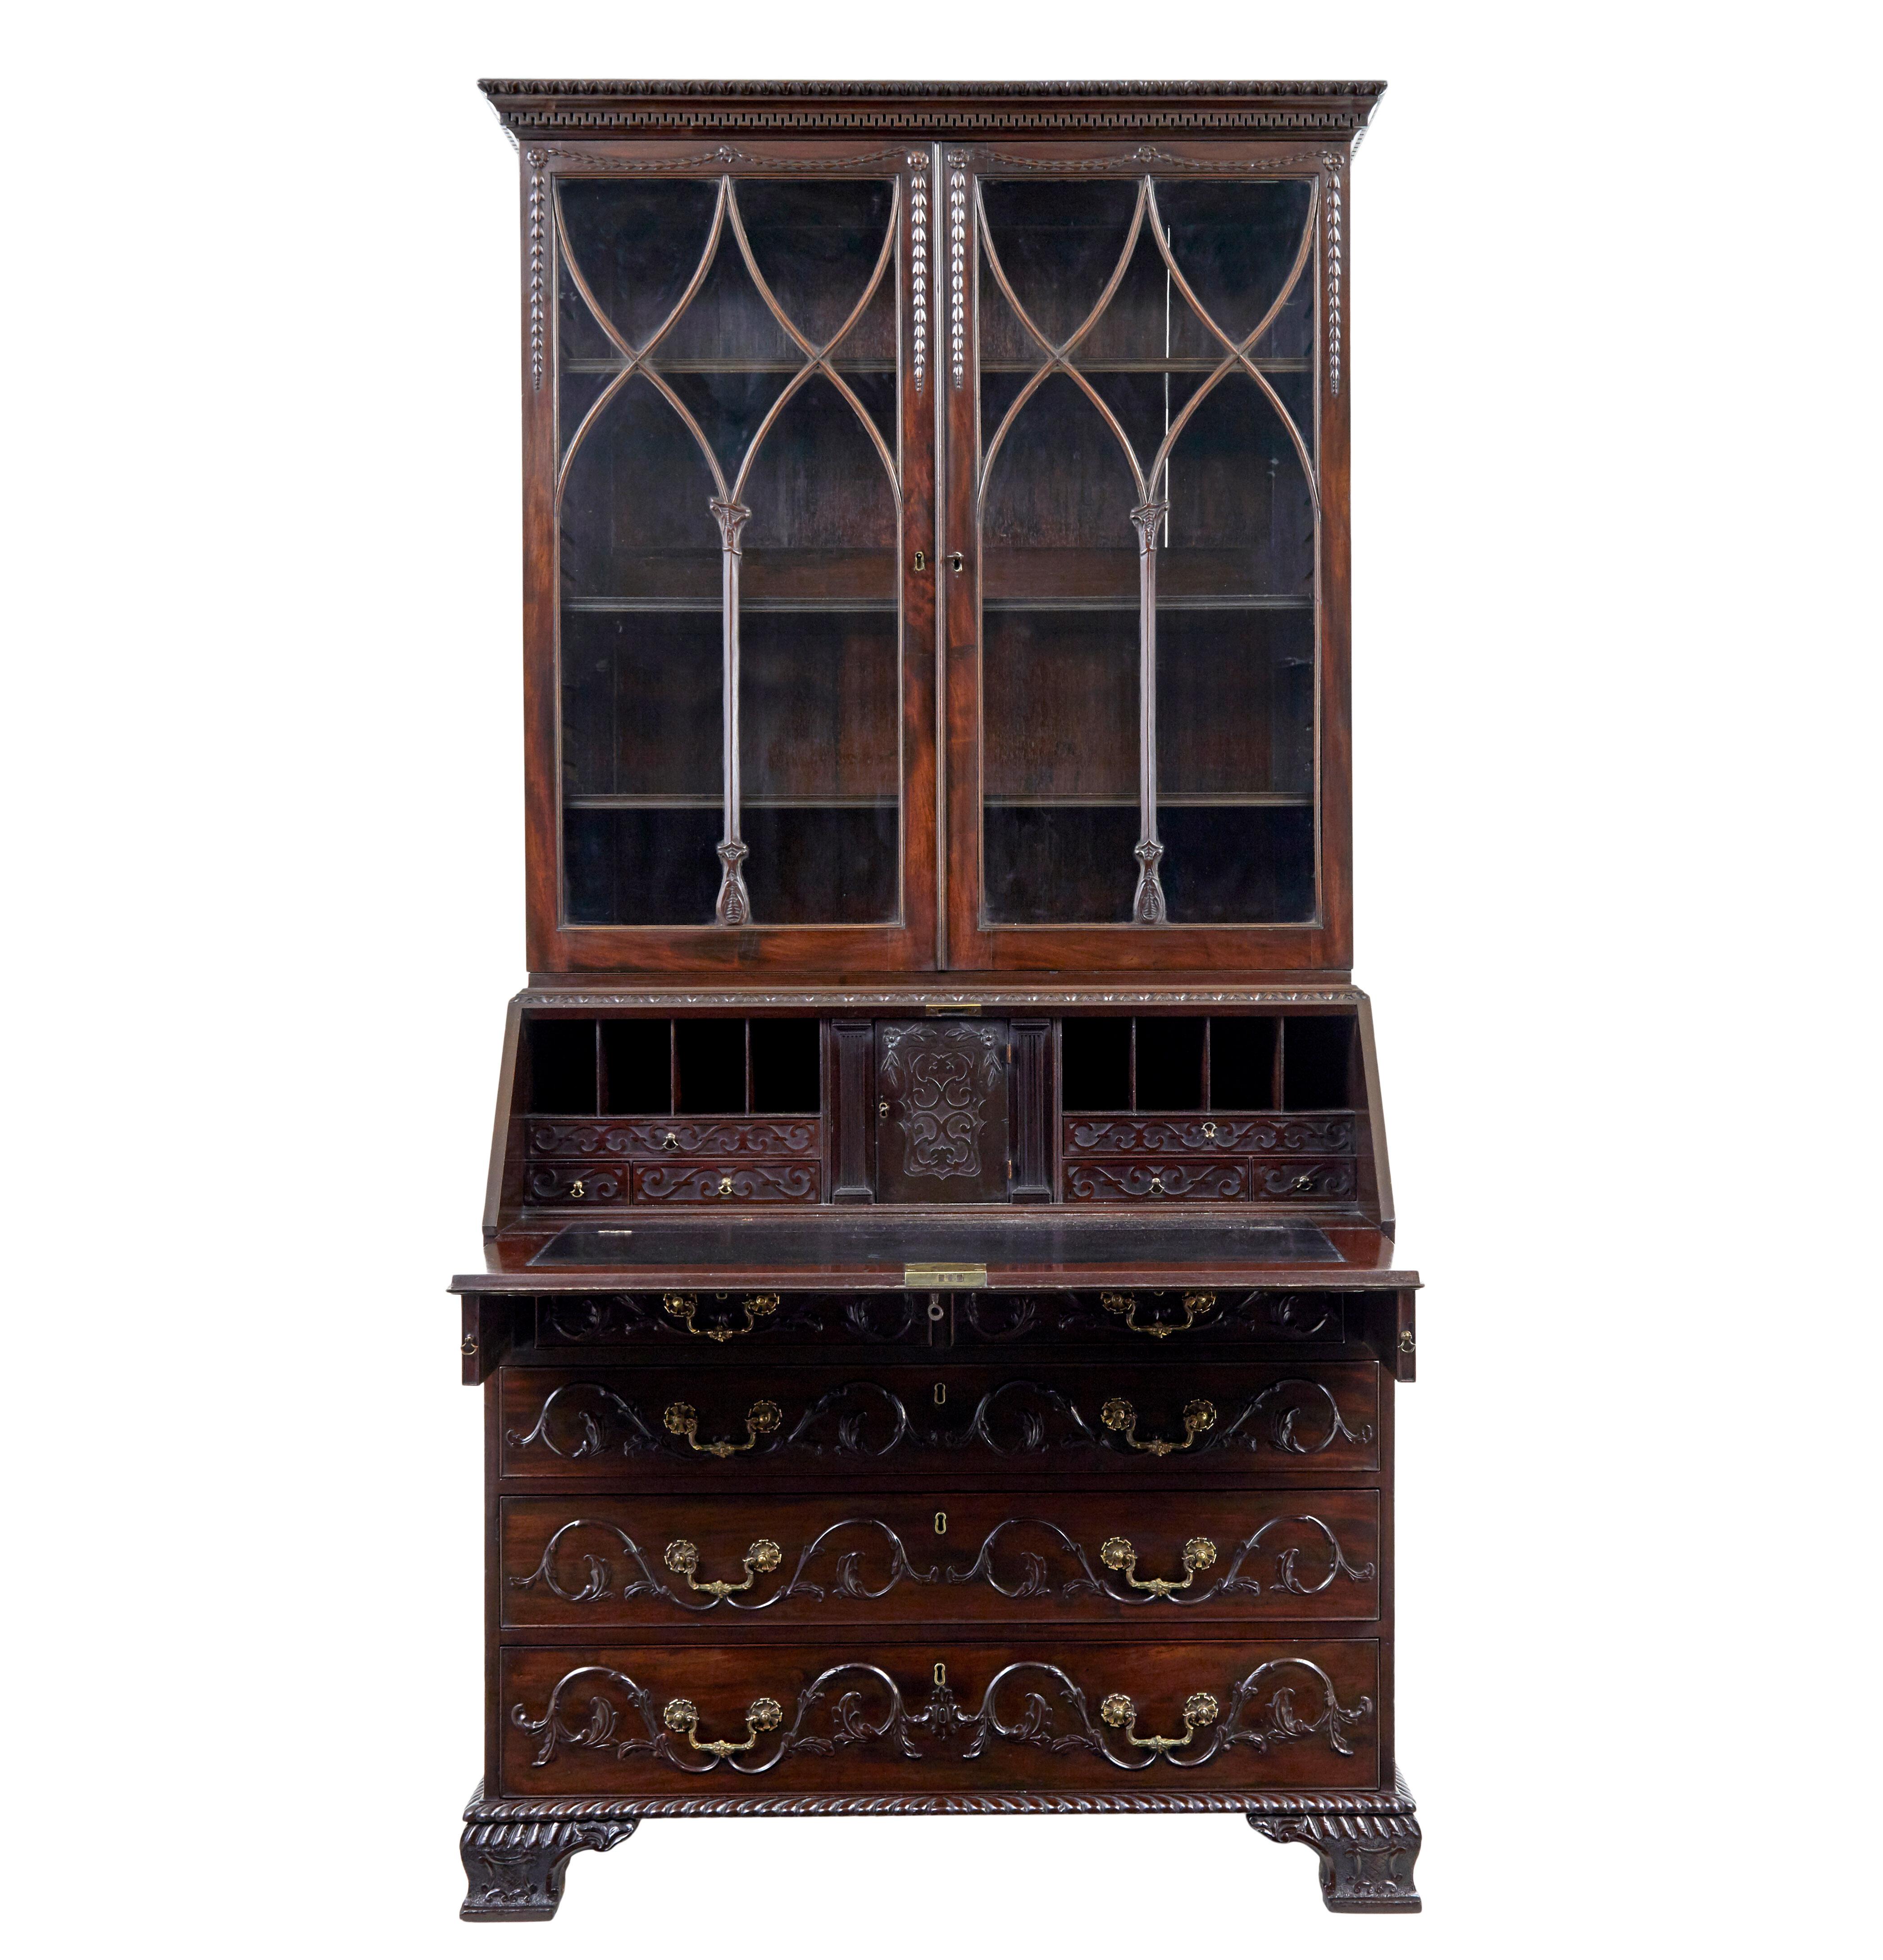 Early 19th century carved mahogany bureau bookcase circa 1820

We believe this piece to be English but could be also be irish. In 2 parts, the top part with original glazing set in gothic astral wood work, 3 adjustable shelves. Harvest and musical